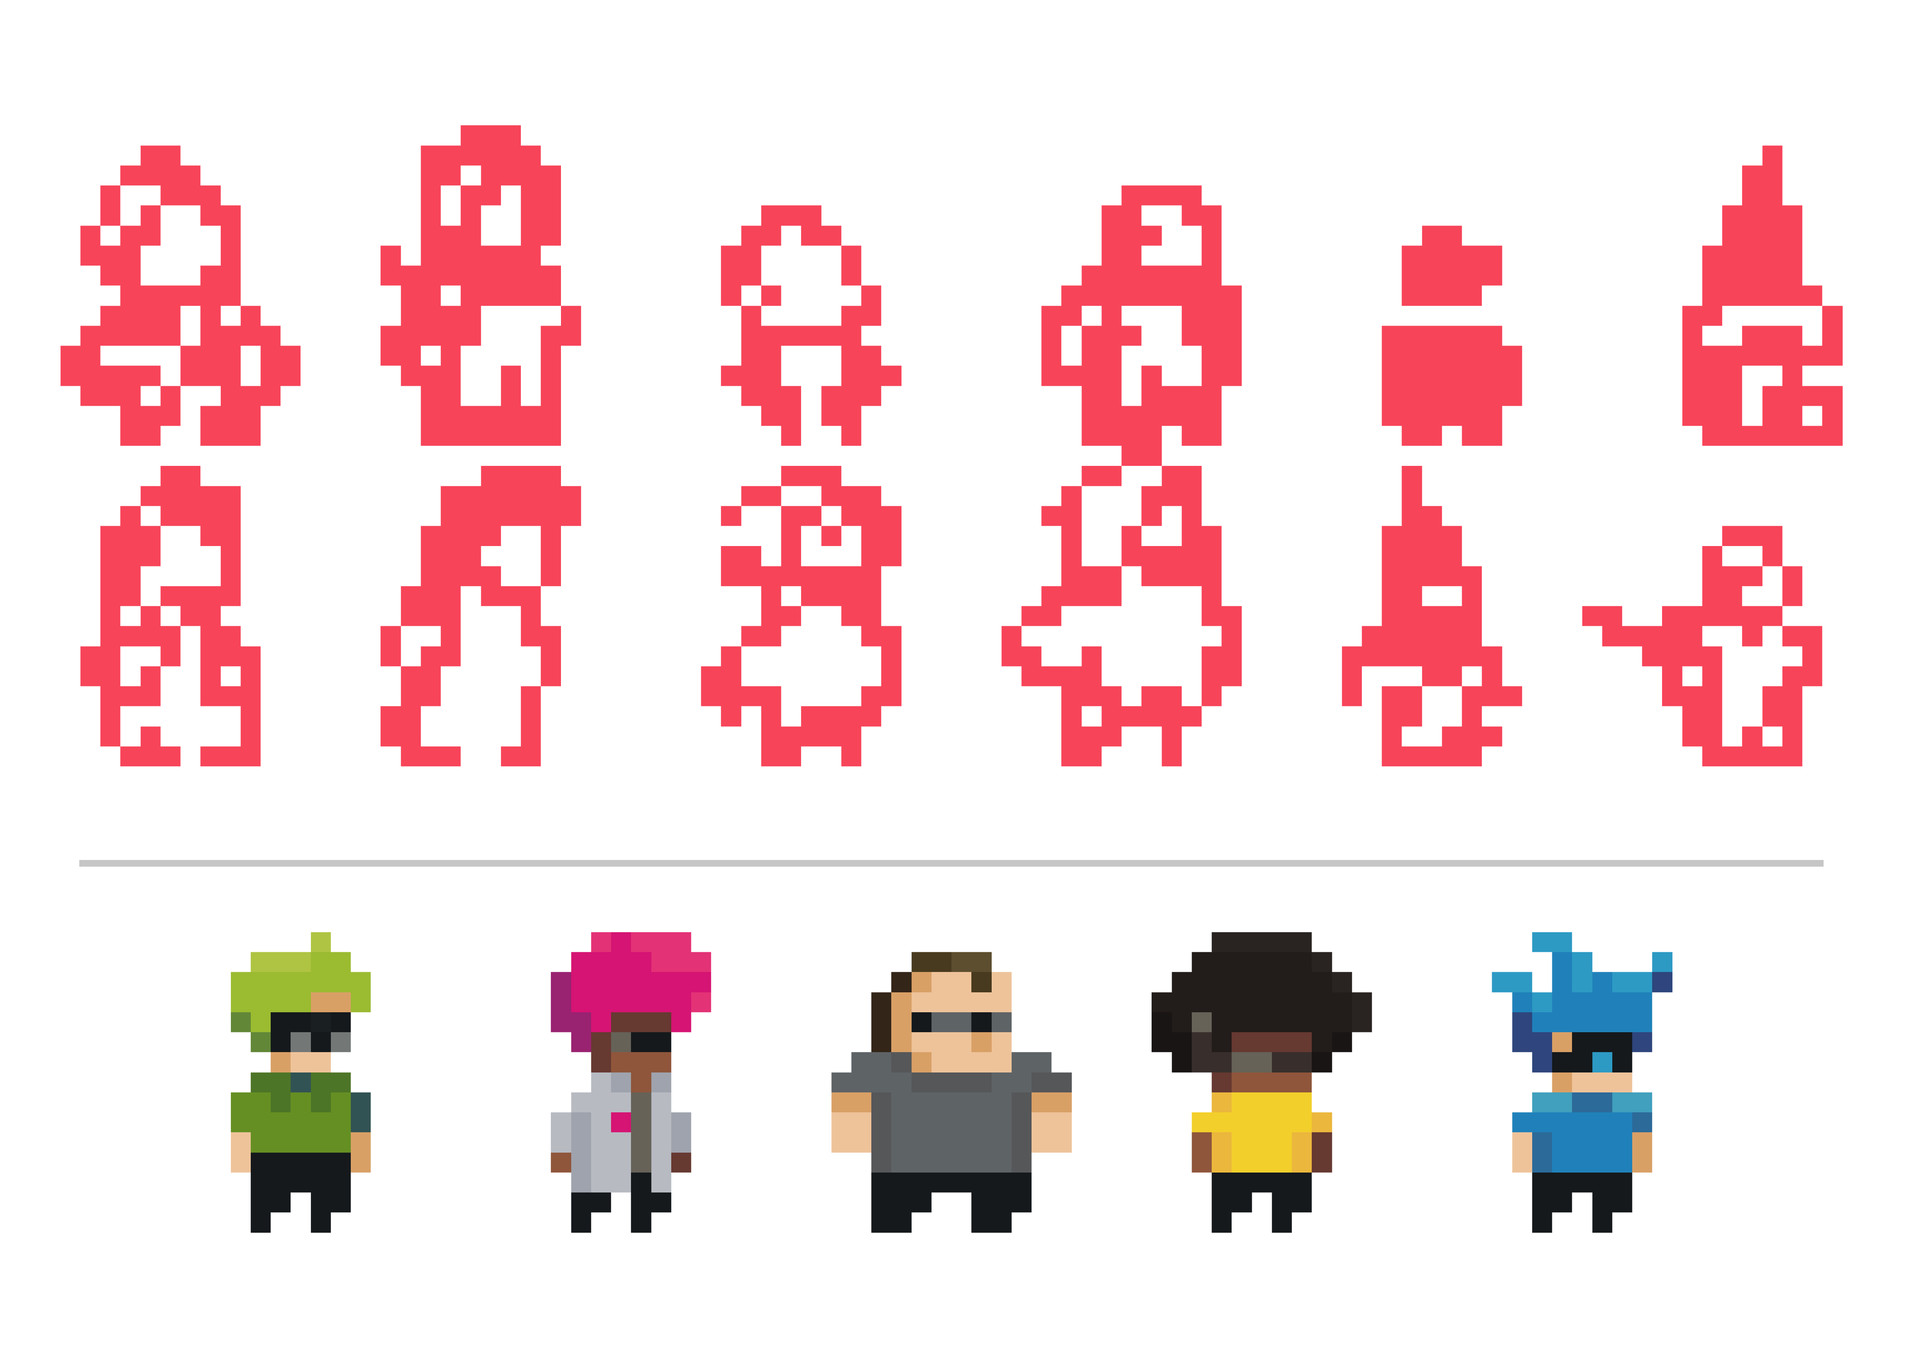 Sketch process of the characters in pixel art.